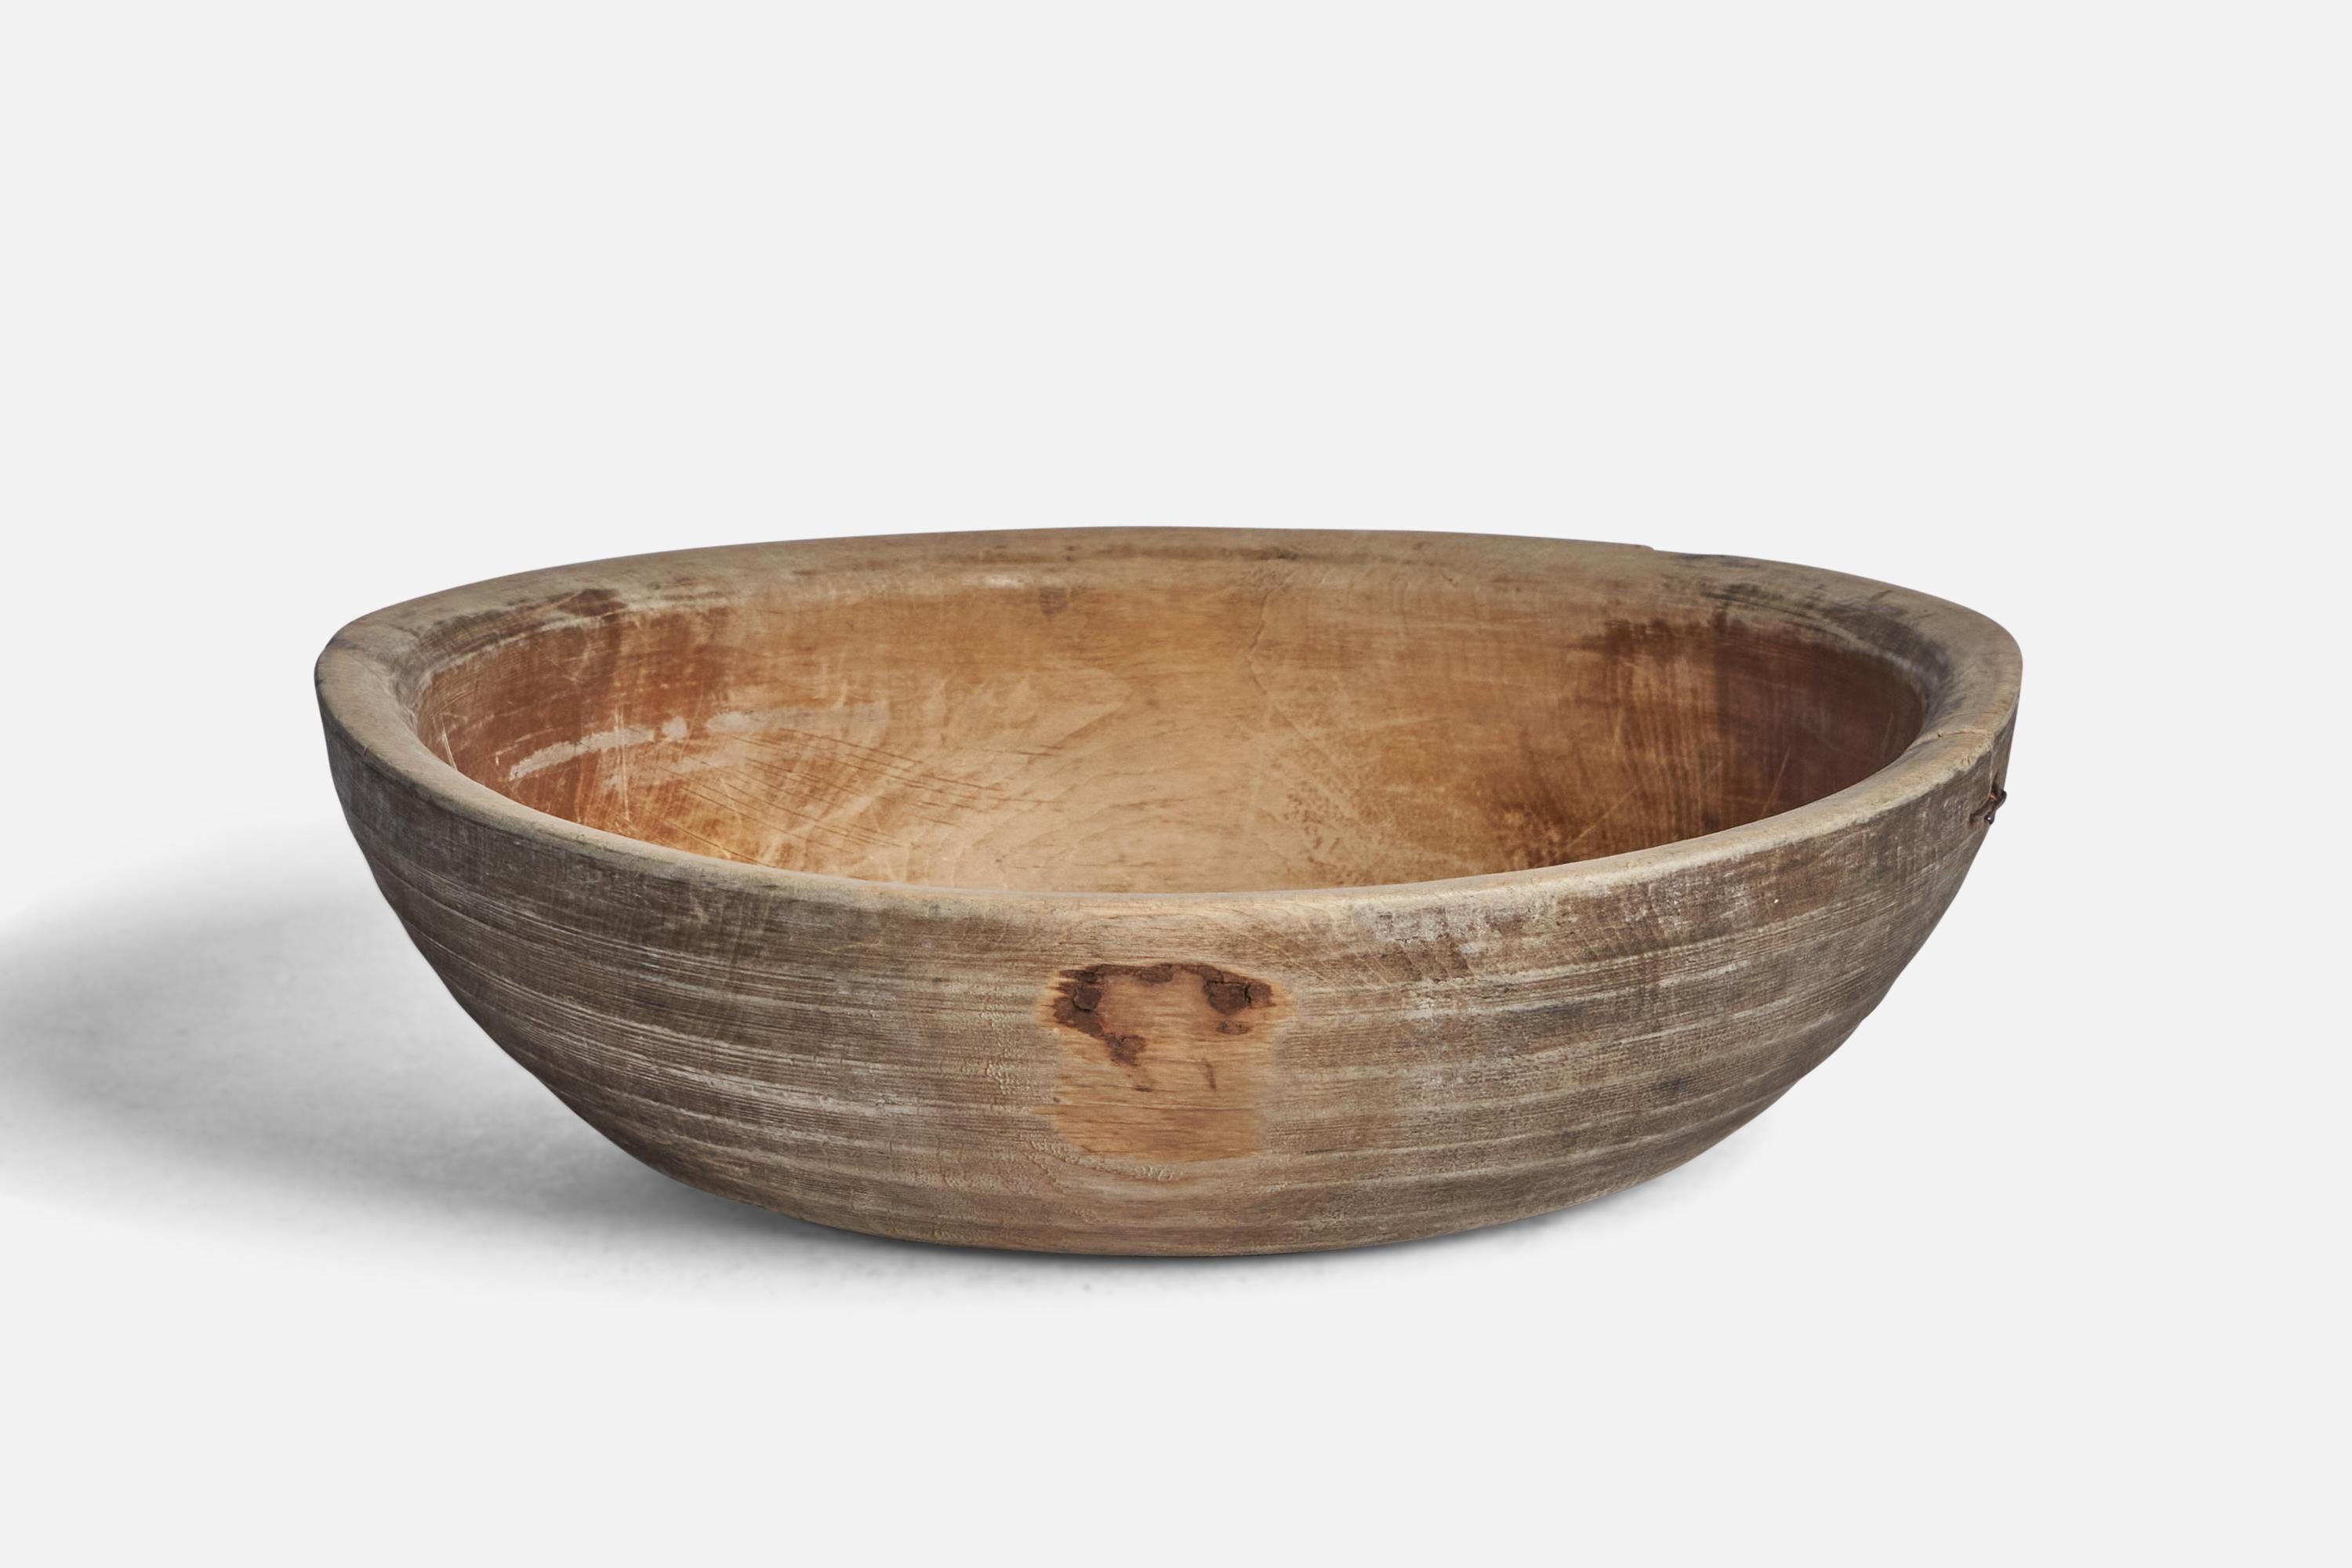 A wood bowl produced in Sweden, 19th Century.